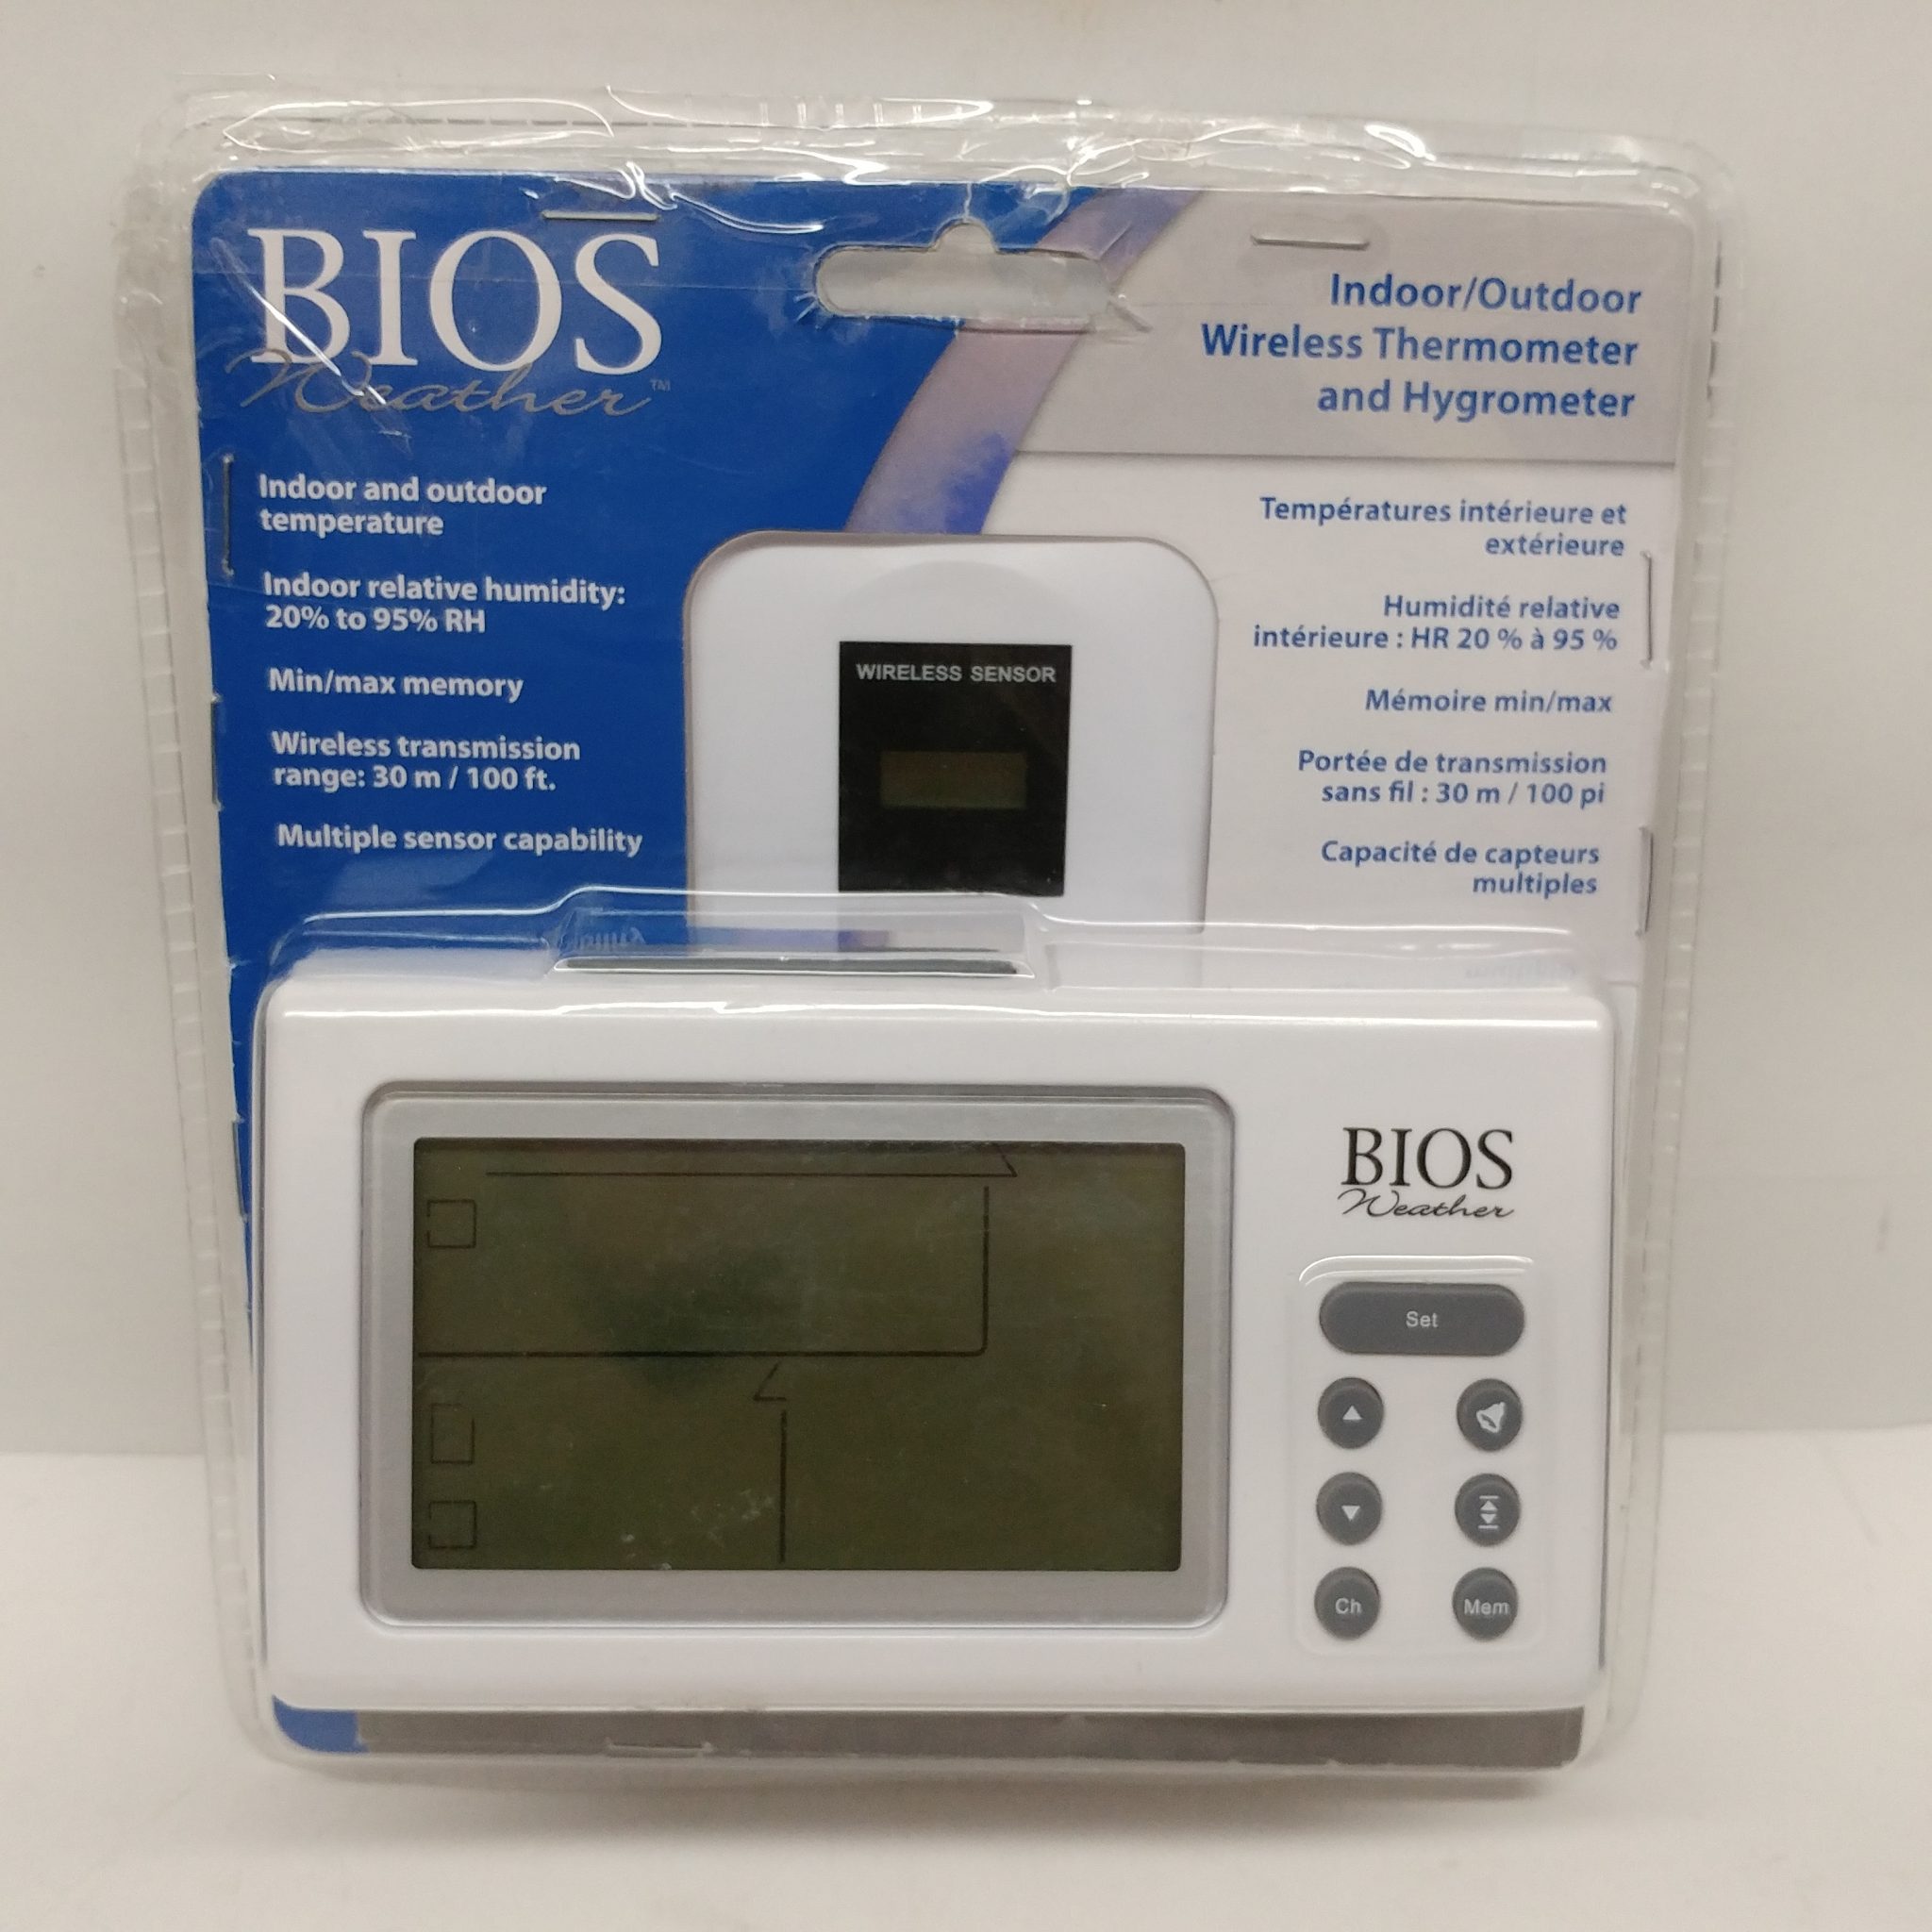 312BC ™ Bios Indoor/Outdoor Wireless Thermometer and Humidifier 